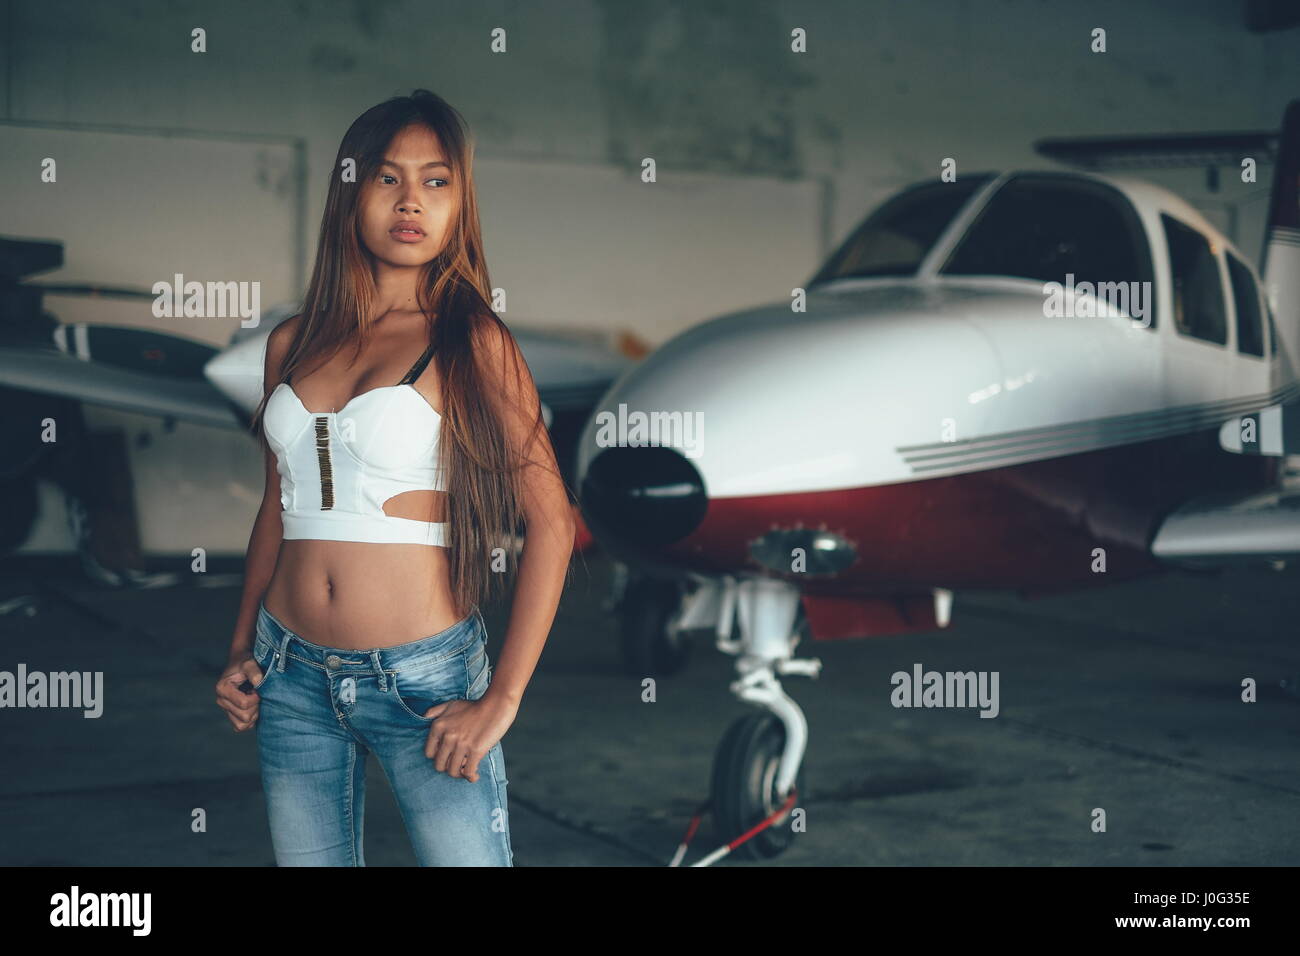 Beautiful female portrait in the airplane hangar, with modern aircraft Stock Photo